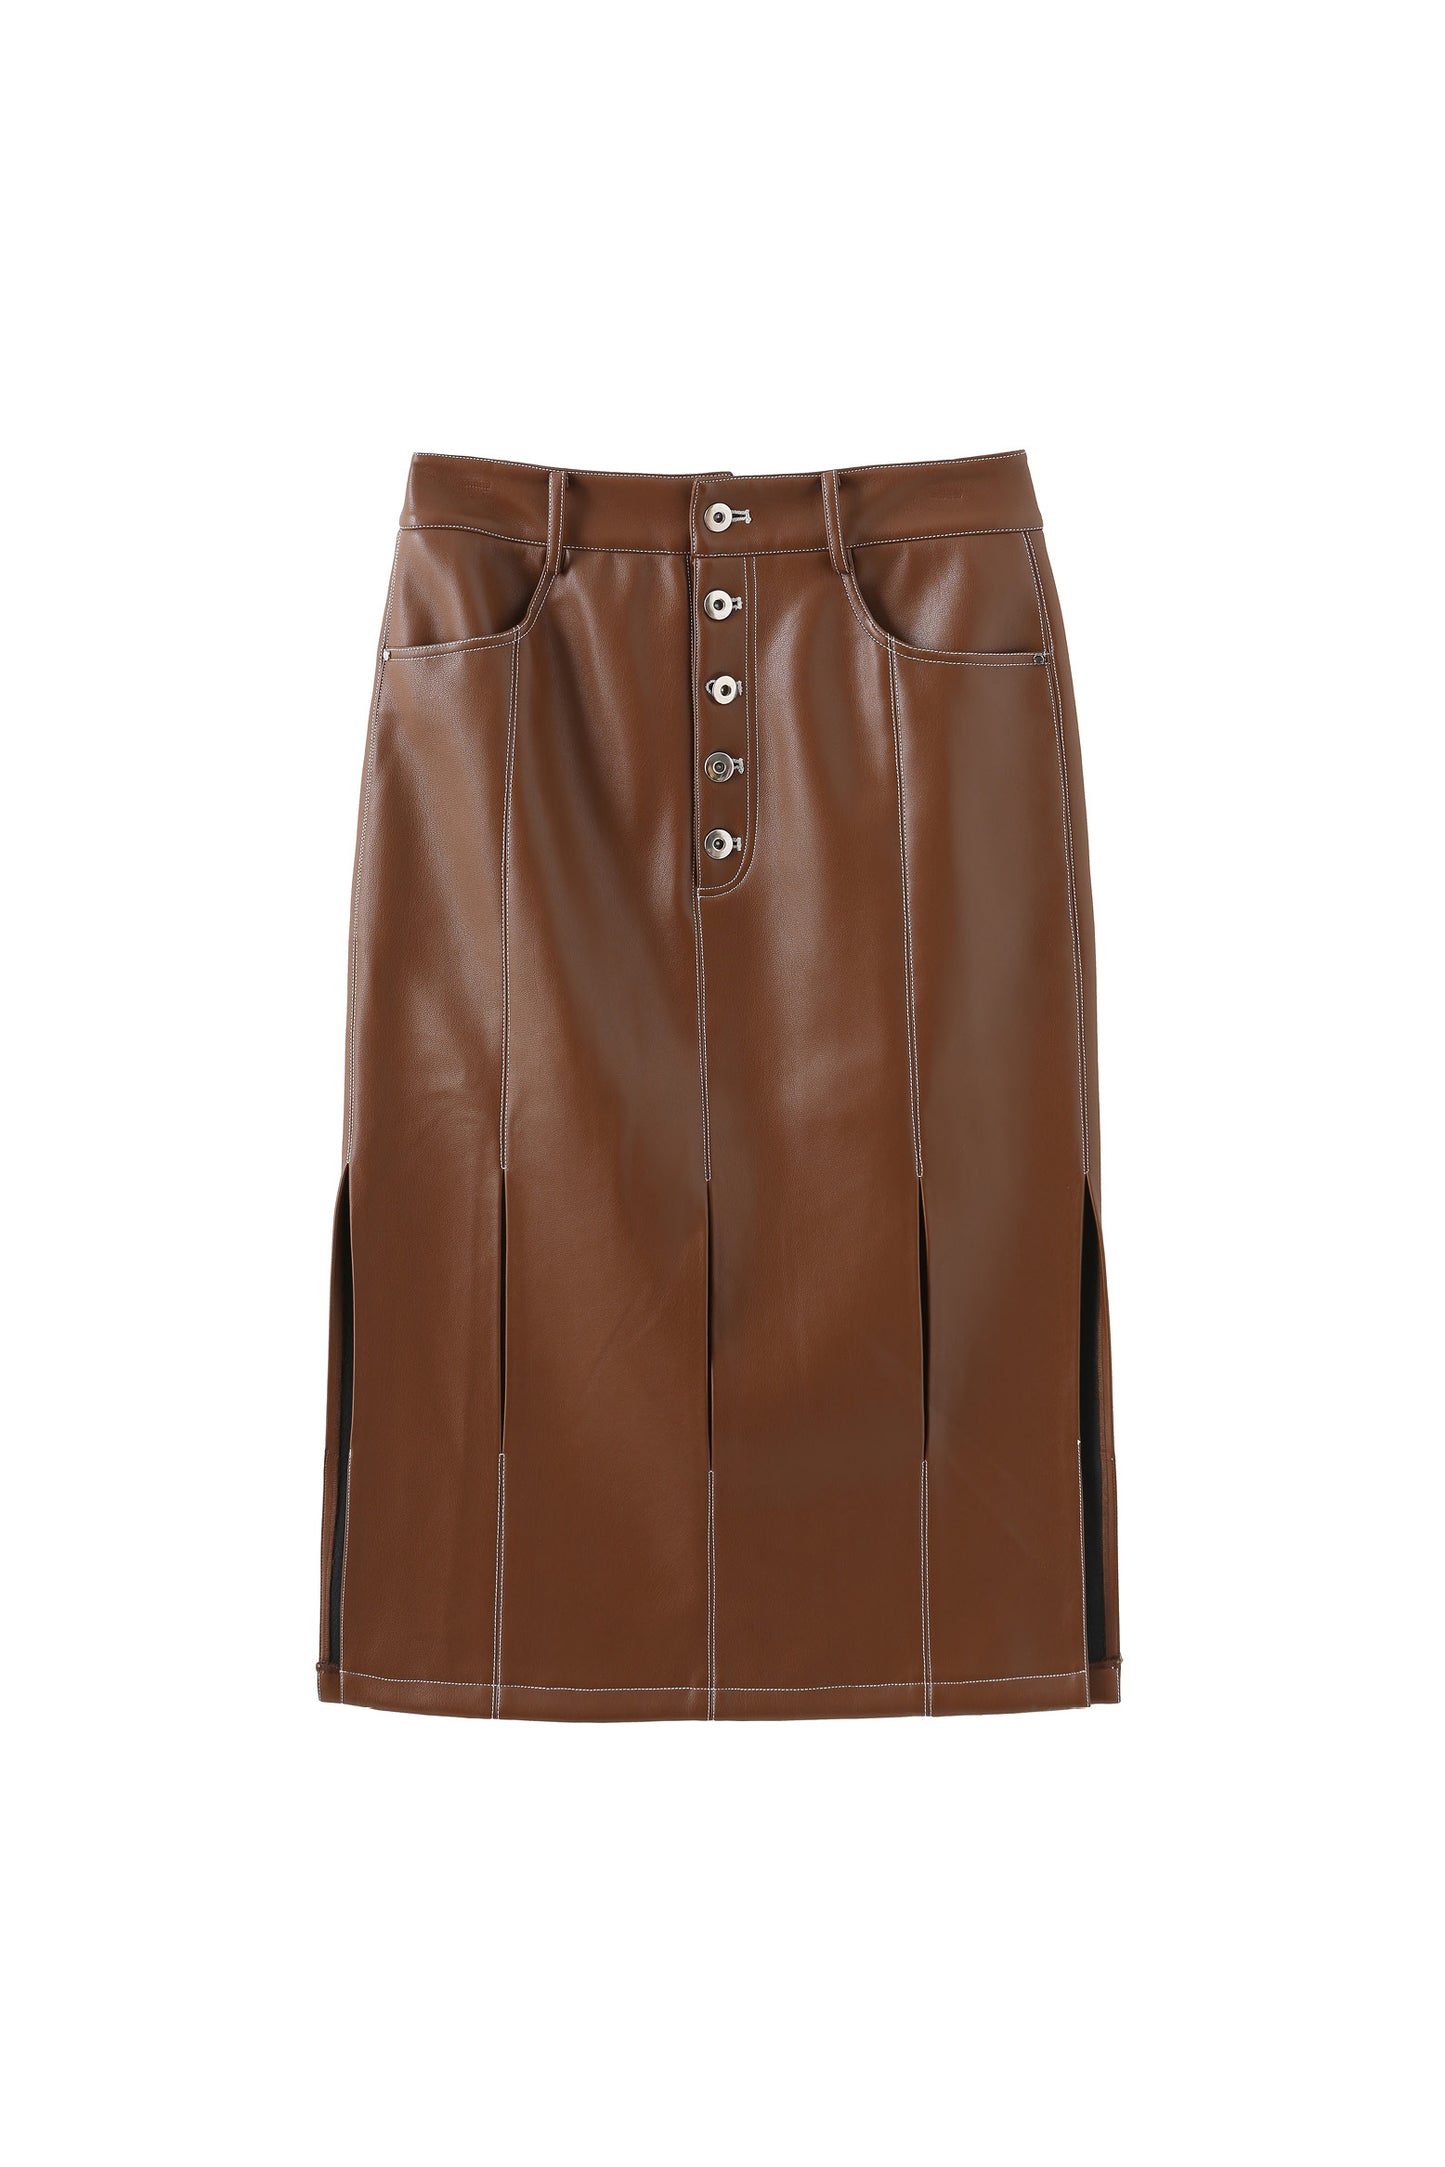 Jagger Leather-free skirt in Nutella